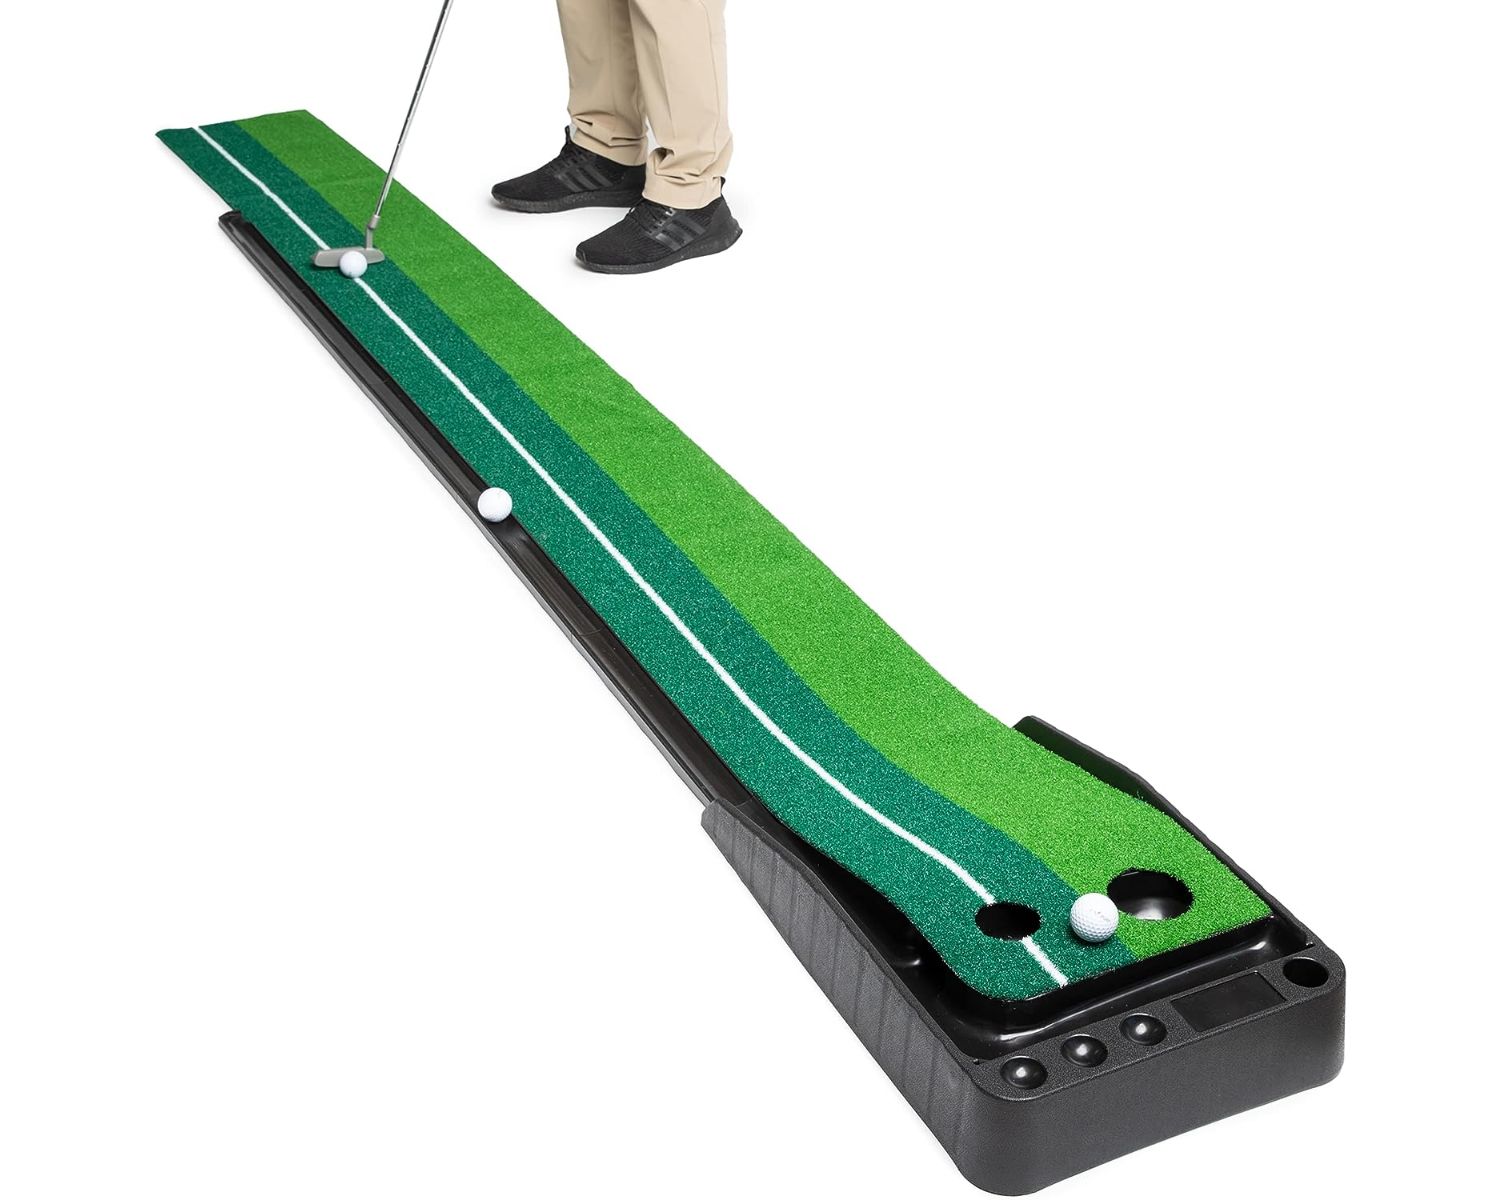 Miniature Golf Set Review: Fun and Affordable Entertainment